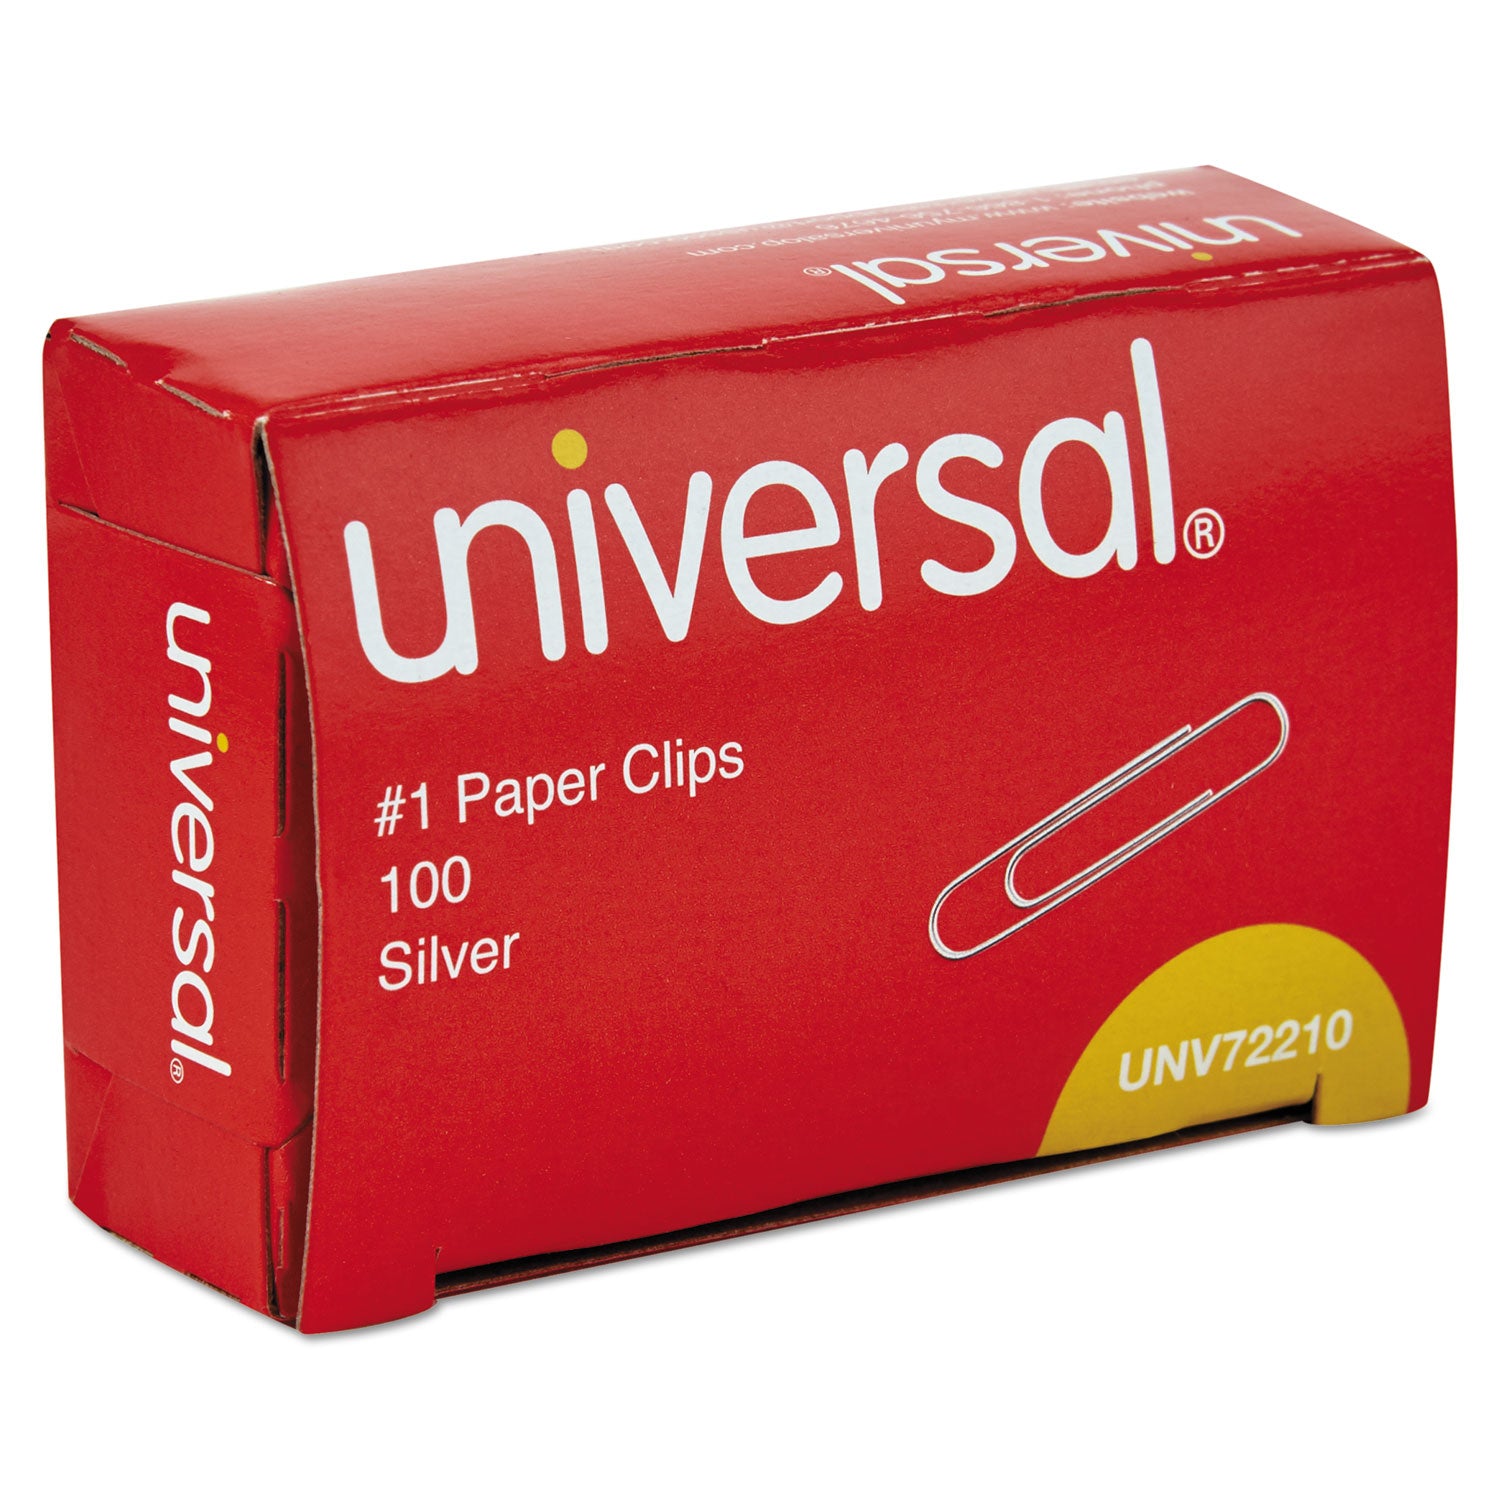 paper-clips-#1-smooth-silver-100-clips-box-10-boxes-pack-12-packs-carton_unv72210ct - 1